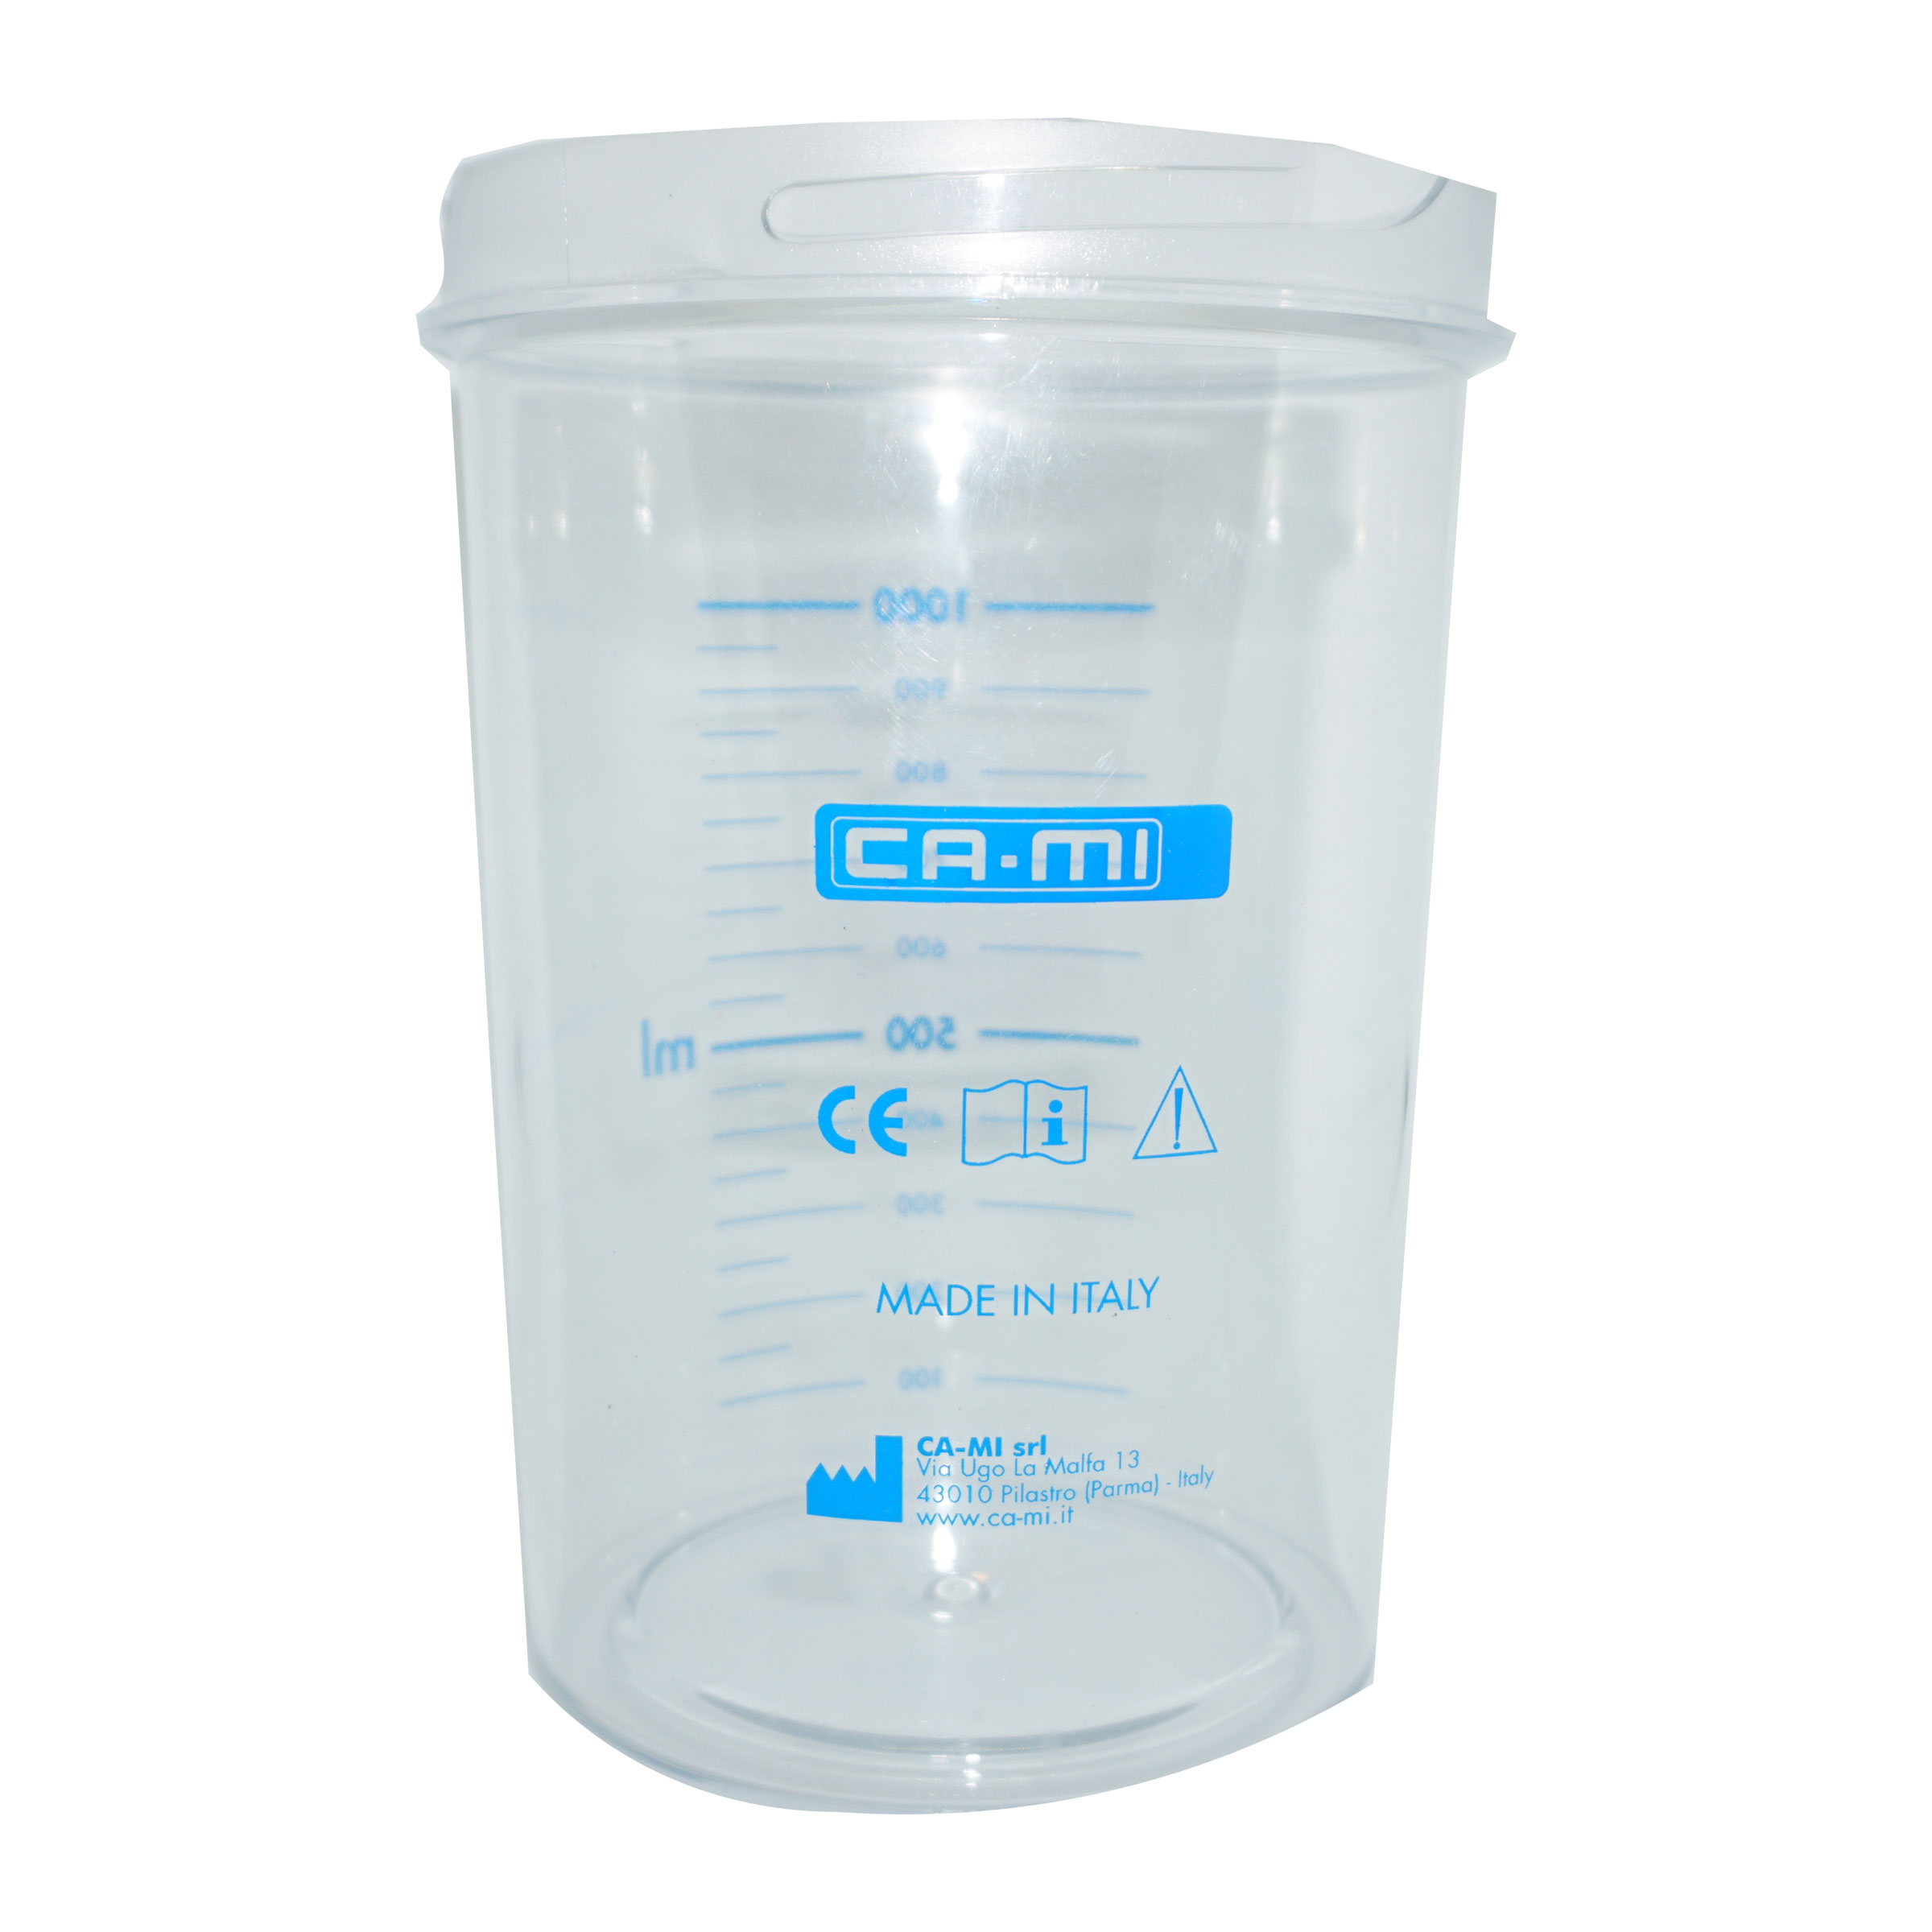 Autoclave Jar - Cami Available at Online Family Pharmacy Qatar Doha